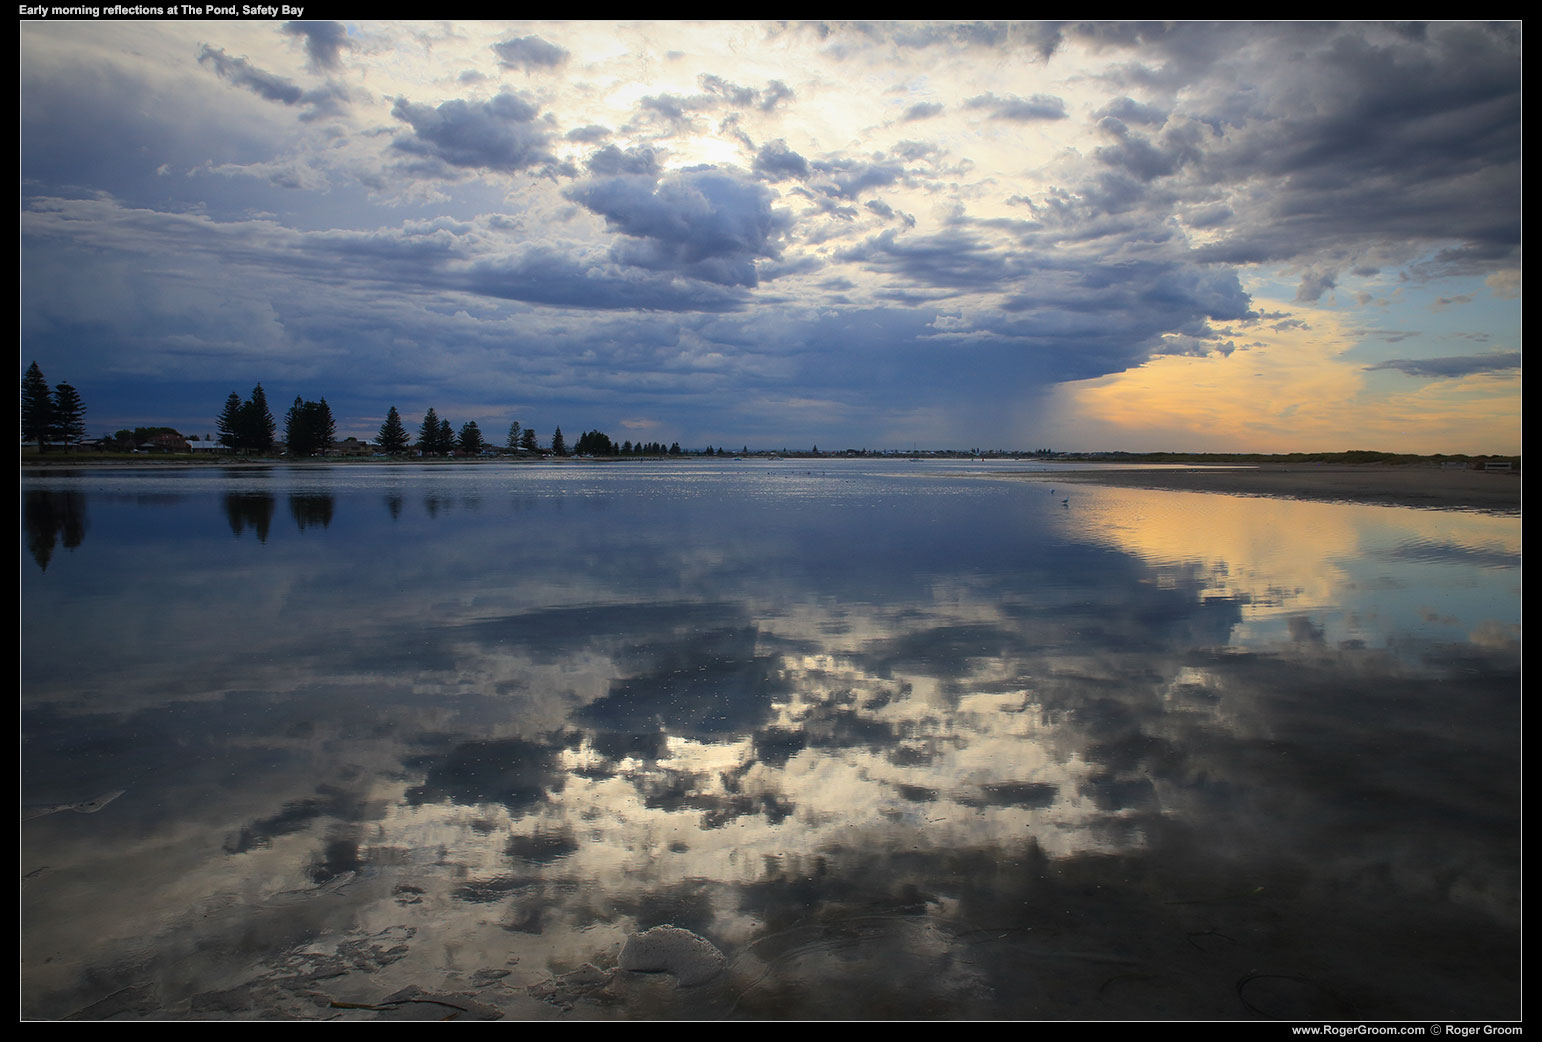 Early morning reflections in The Pond at Safety Bay / Tern Island with storm clouds in the distance.